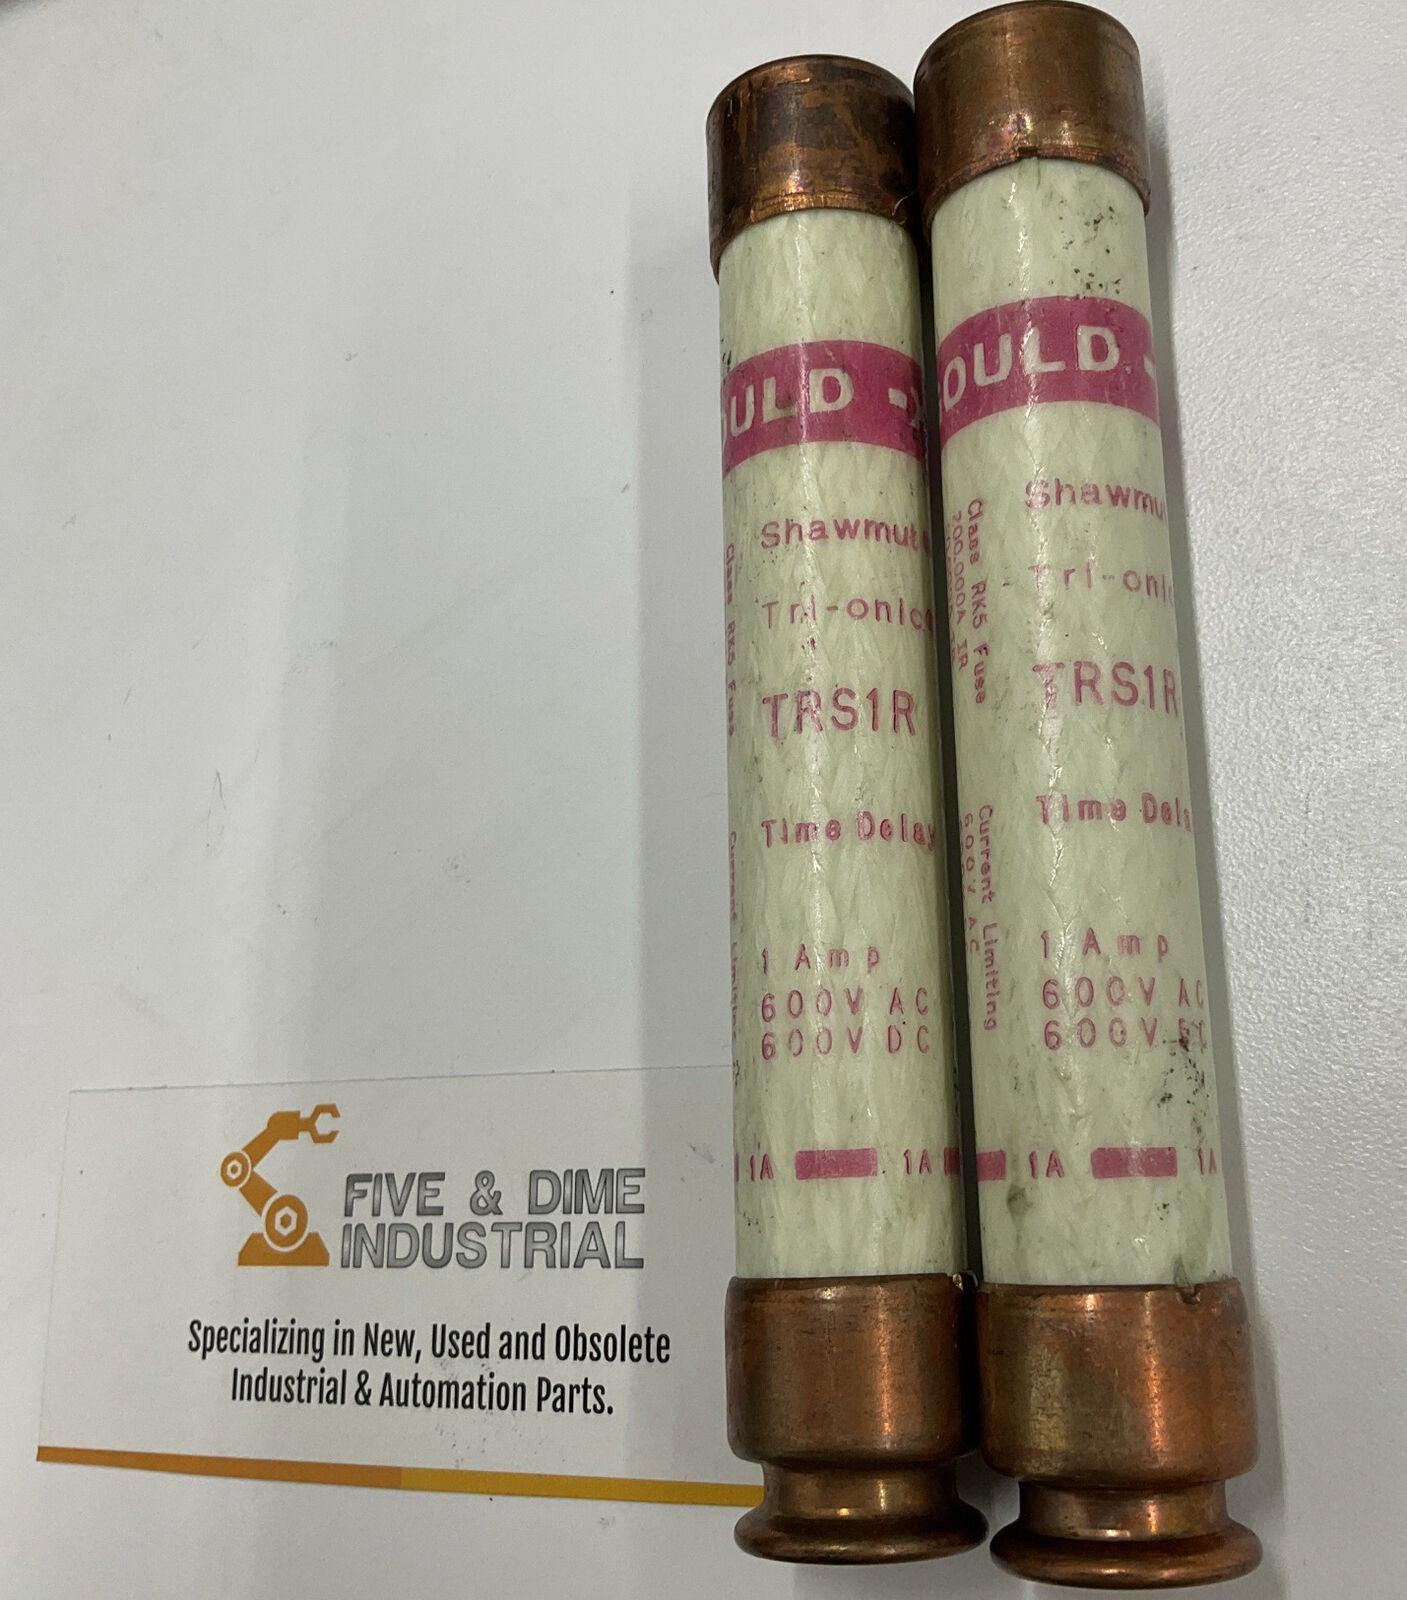 Gould Shawmut Tri-Onic TRS1R Lot of 2 Time Delay Fuses (CL112)